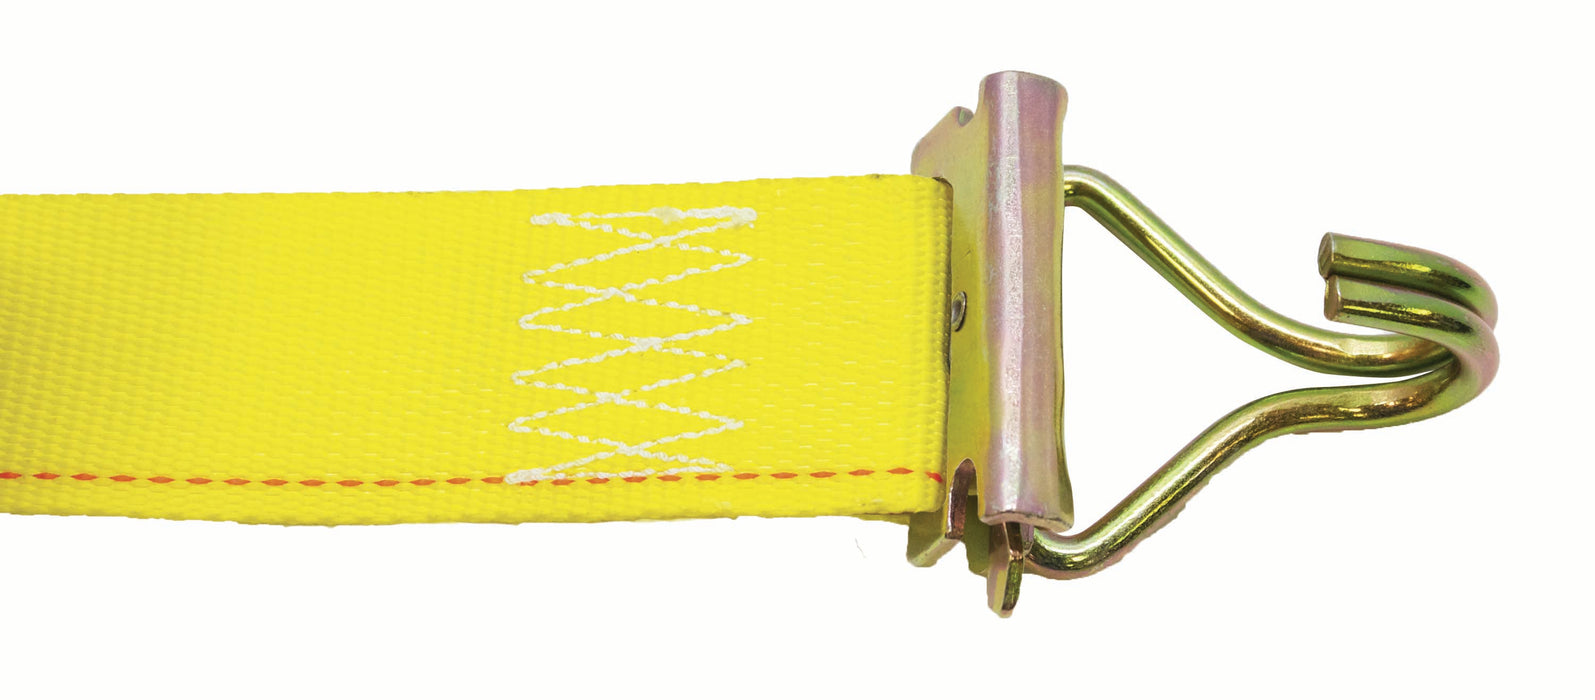 4K RATCHET STRAP 2"X12' WITH E FITTINGS & F WIRE HOOKS